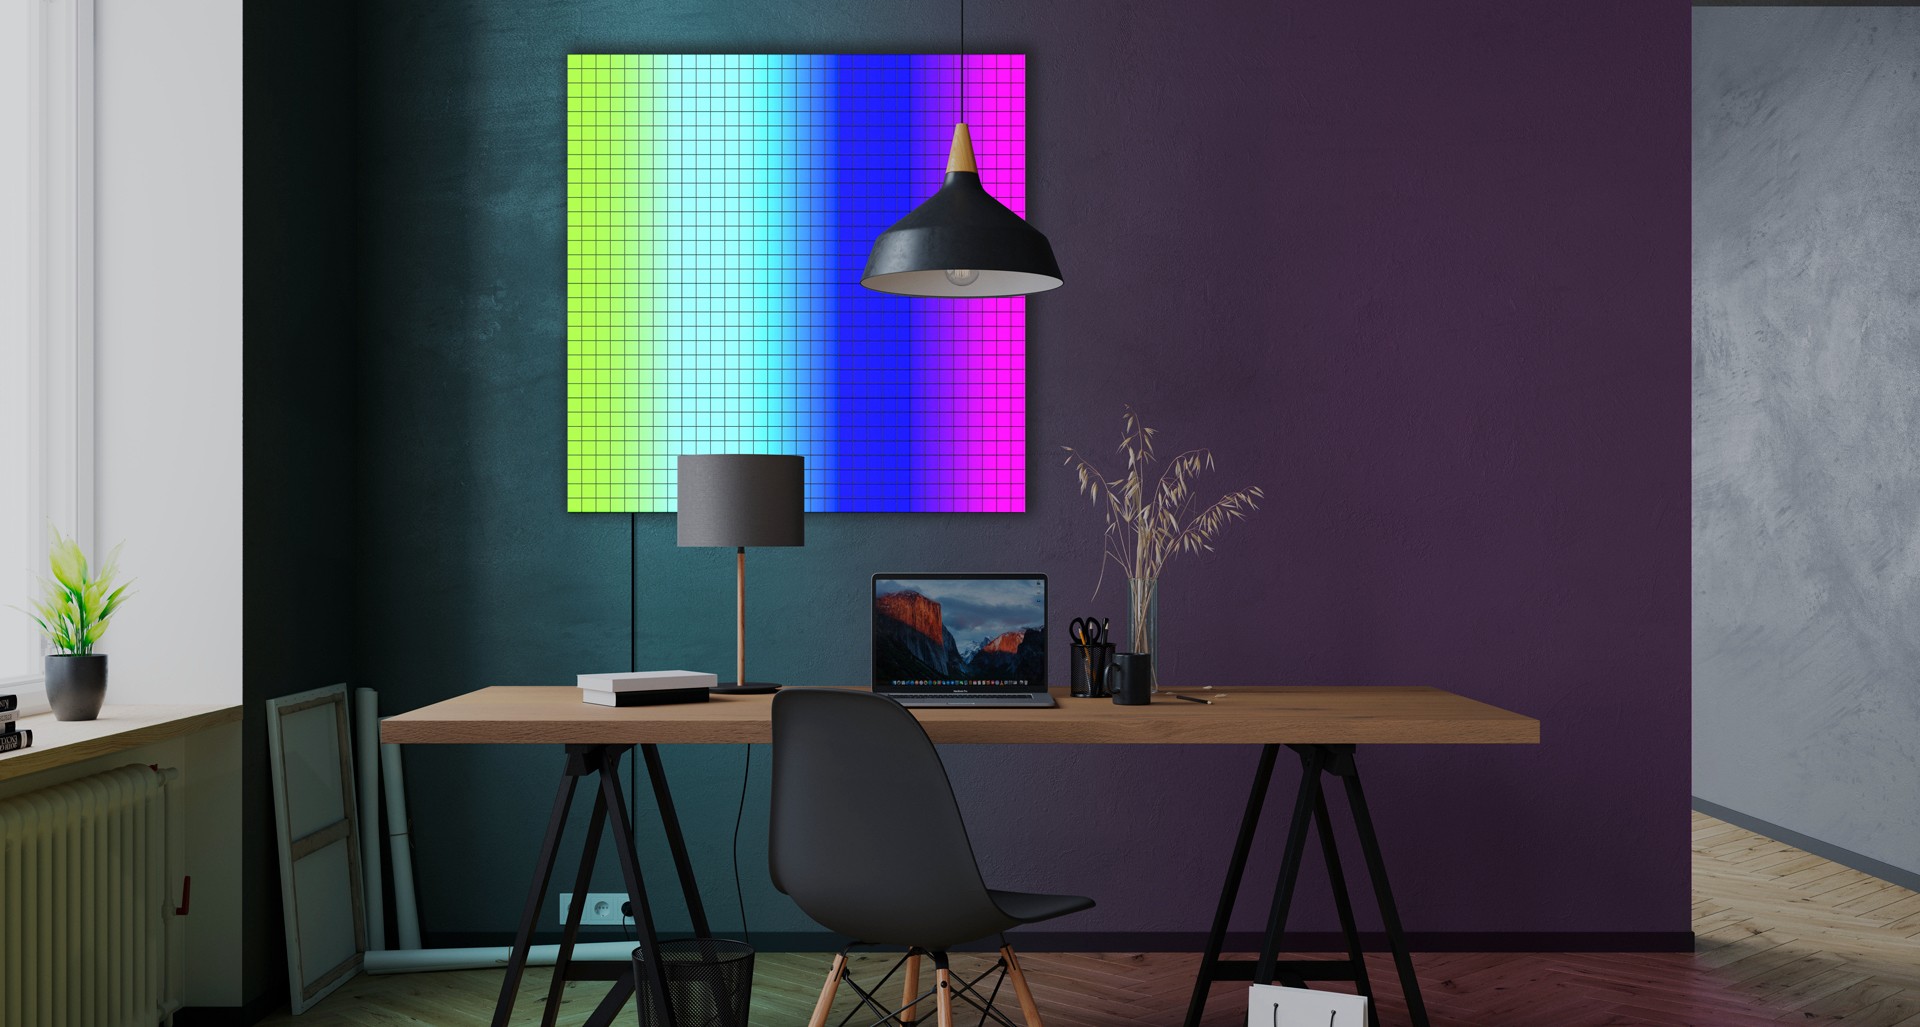 led smart square on the wall shining